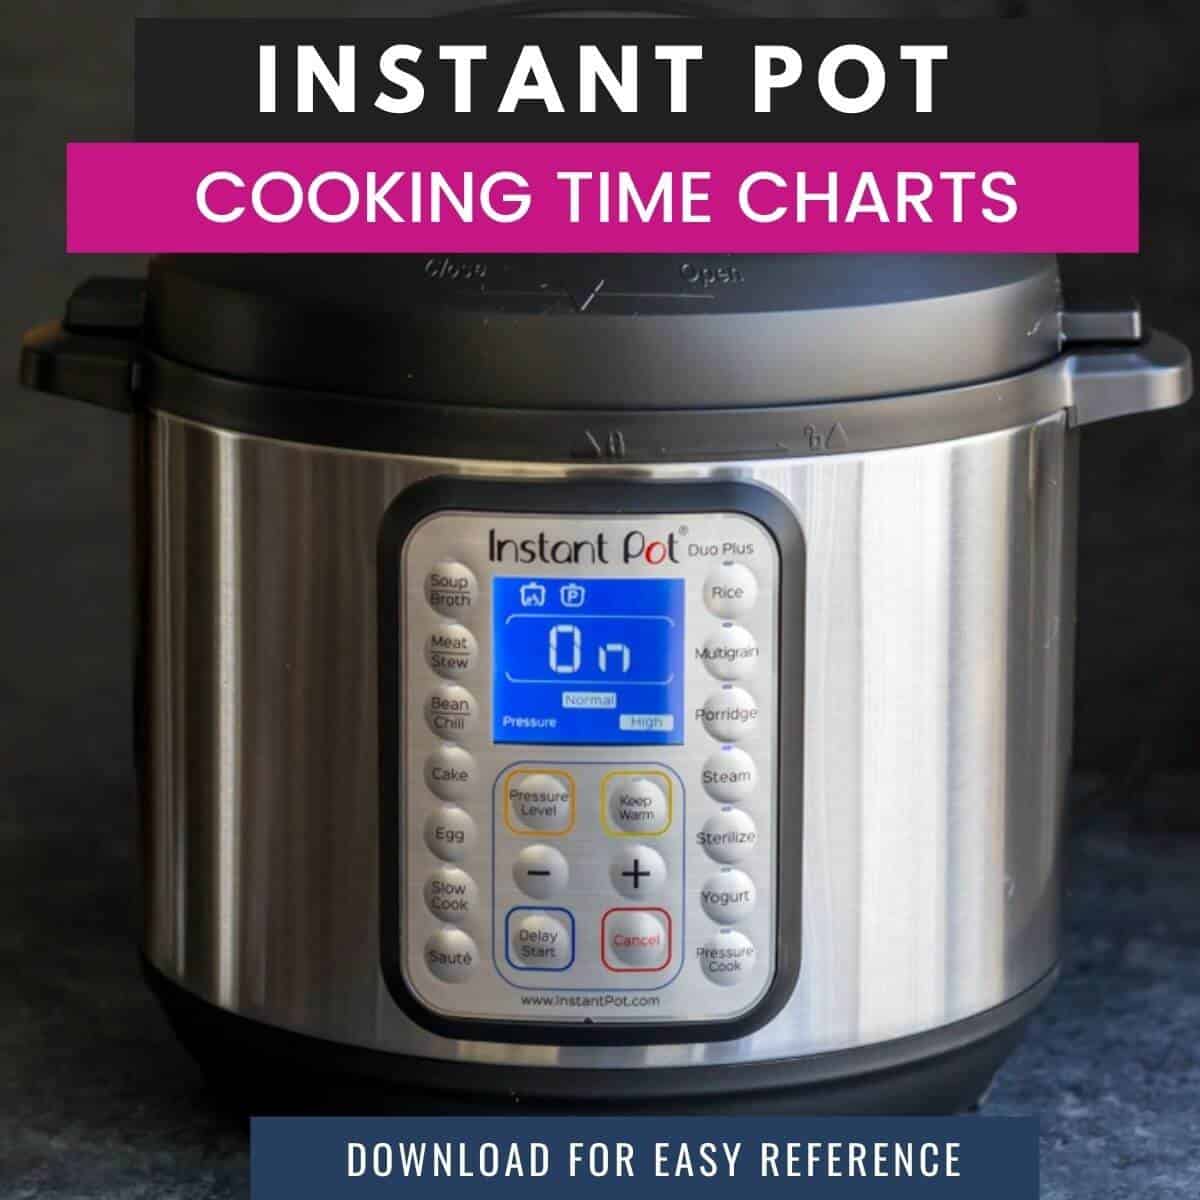 Instant Pot Cooking Times – The Ultimate Guide